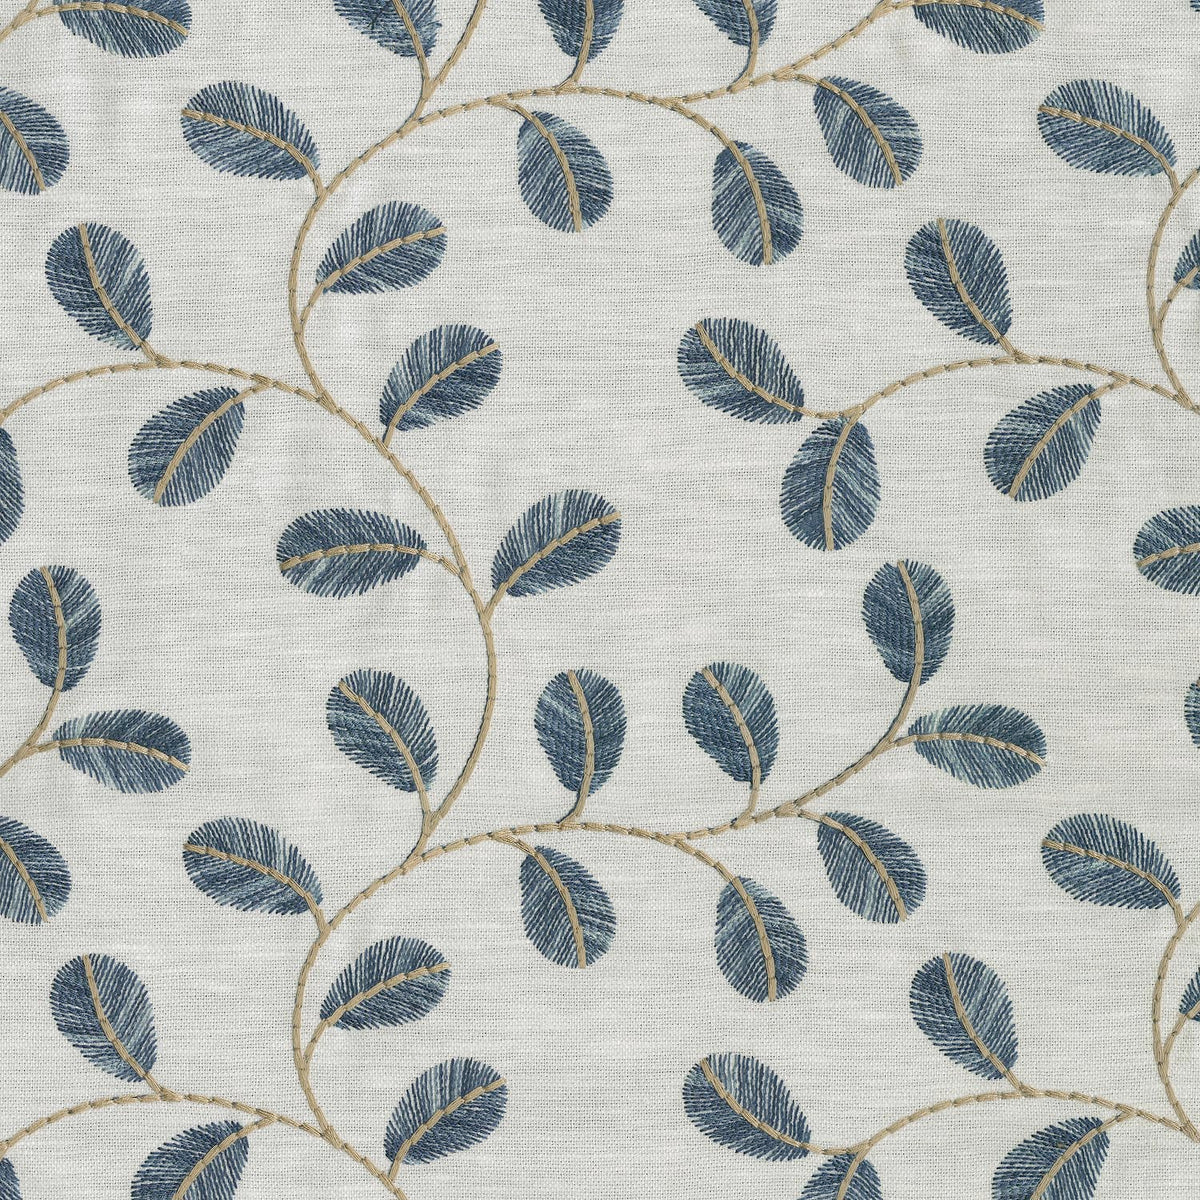 P/K Lifestyles Leaf Love Embroidery - Lapis 410532 Upholstery Fabric